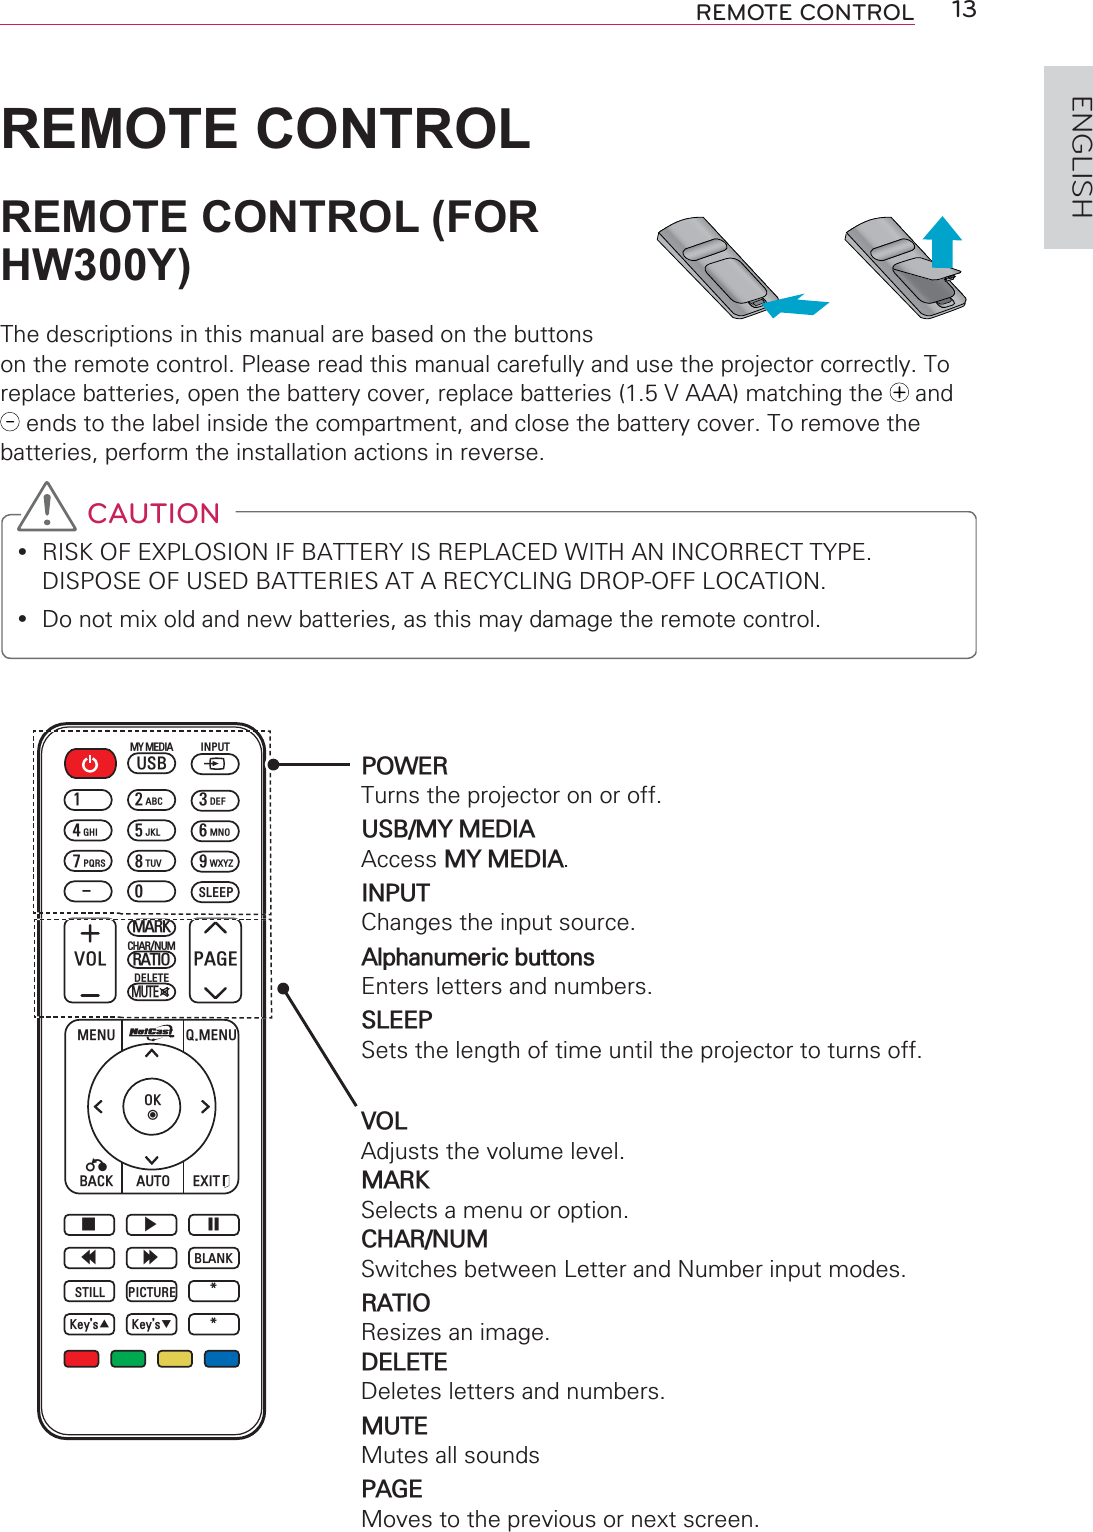 13REMOTE CONTROLENGLISHREMOTE CONTROLREMOTE CONTROL (FOR HW300Y)The descriptions in this manual are based on the buttons on the remote control. Please read this manual carefully and use the projector correctly. To replace batteries, open the battery cover, replace batteries (1.5 V AAA) matching the   and  ends to the label inside the compartment, and close the battery cover. To remove the batteries, perform the installation actions in reverse. CAUTIONy RISK OF EXPLOSION IF BATTERY IS REPLACED WITH AN INCORRECT TYPE. DISPOSE OF USED BATTERIES AT A RECYCLING DROP-OFF LOCATION.y Do not mix old and new batteries, as this may damage the remote control.86%ᰧᰦᰨᰪᰩ%/$1.6/((33,&amp;785(67,//.H\،Vᯝ.H\،Vᯜ92/ 3$*(*+,3456$%&amp;-./789&apos;()012:;&lt;=0&lt;0(&apos;,$0$5.5$7,20(18 40(18ᰙ%$&amp;. (;,7$8722.ᯙ&amp;+$5180087(&apos;(/(7(,1387POWERTurns the projector on or off.USB/MY MEDIAAccess MY MEDIA.INPUTChanges the input source.Alphanumeric buttonsEnters letters and numbers.SLEEPSets the length of time until the projector to turns off.VOLAdjusts the volume level.MARKSelects a menu or option.CHAR/NUMSwitches between Letter and Number input modes.RATIOResizes an image.DELETEDeletes letters and numbers.MUTEMutes all soundsPAGEMoves to the previous or next screen.